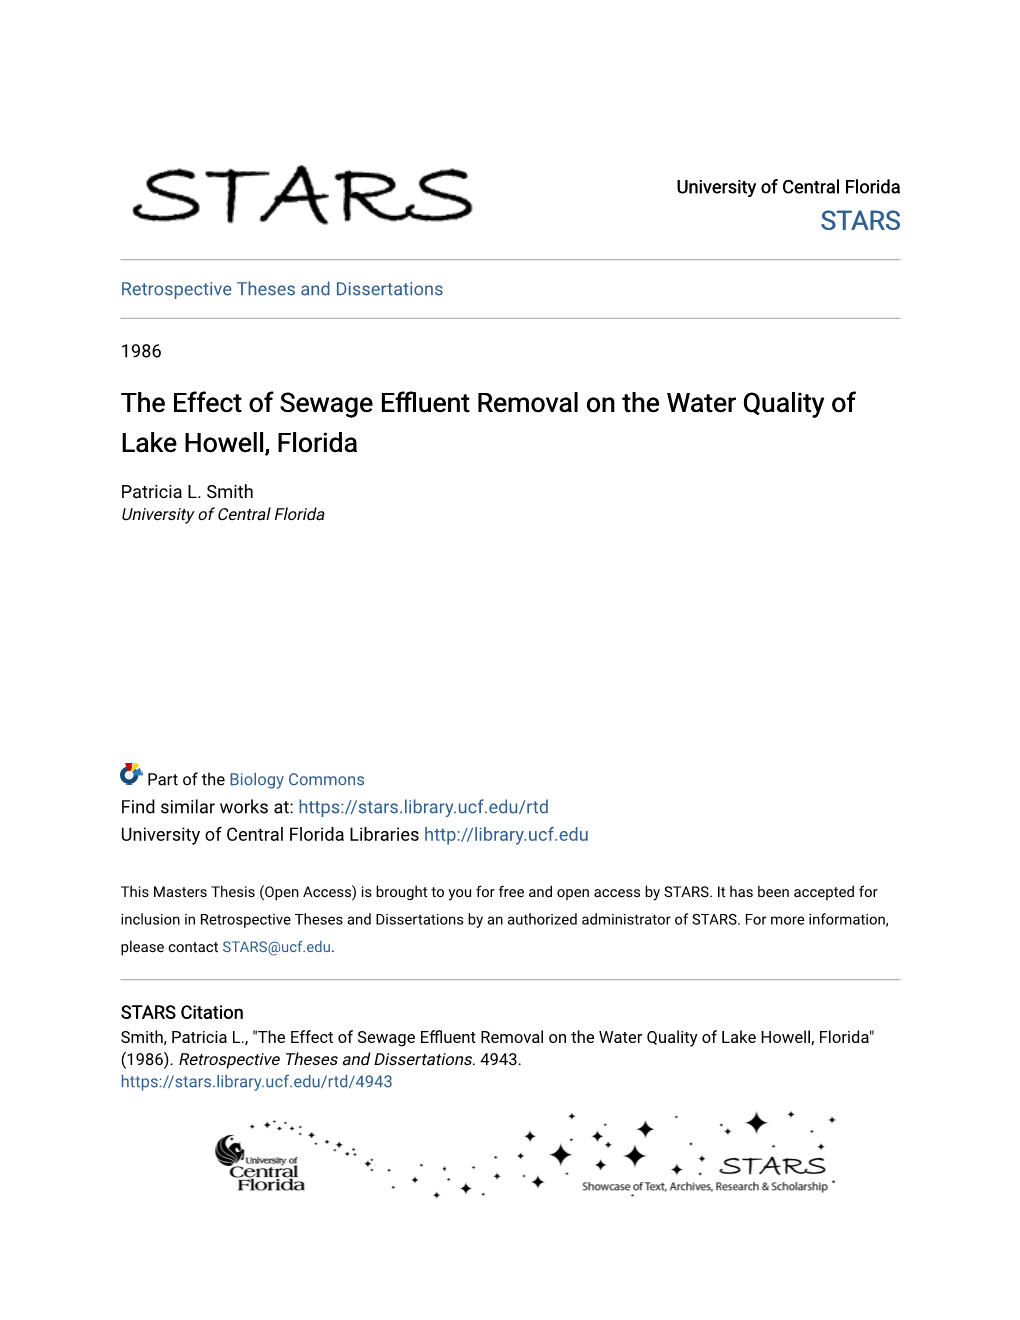 The Effect of Sewage Effluent Removal on the Water Quality of Lake Howell, Florida